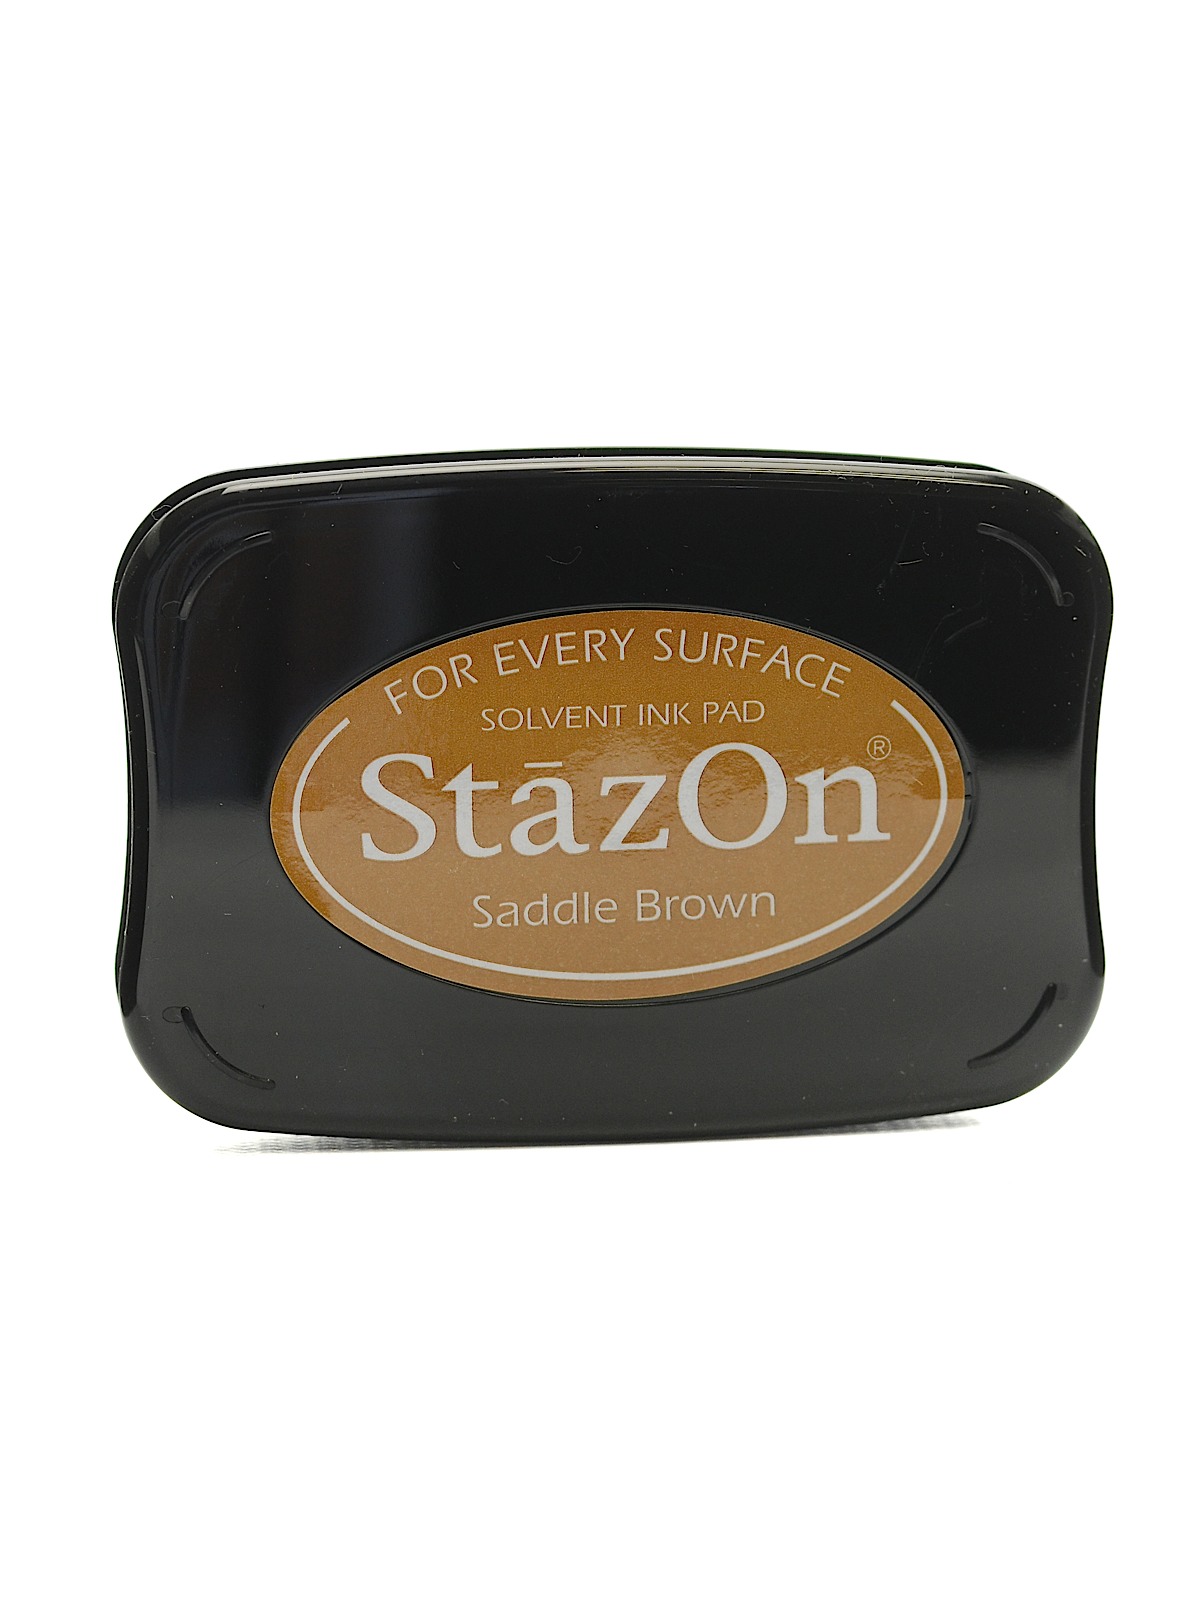 Stazon Solvent Ink Saddle Brown 3.75 In. X 2.625 In. Full-size Pad